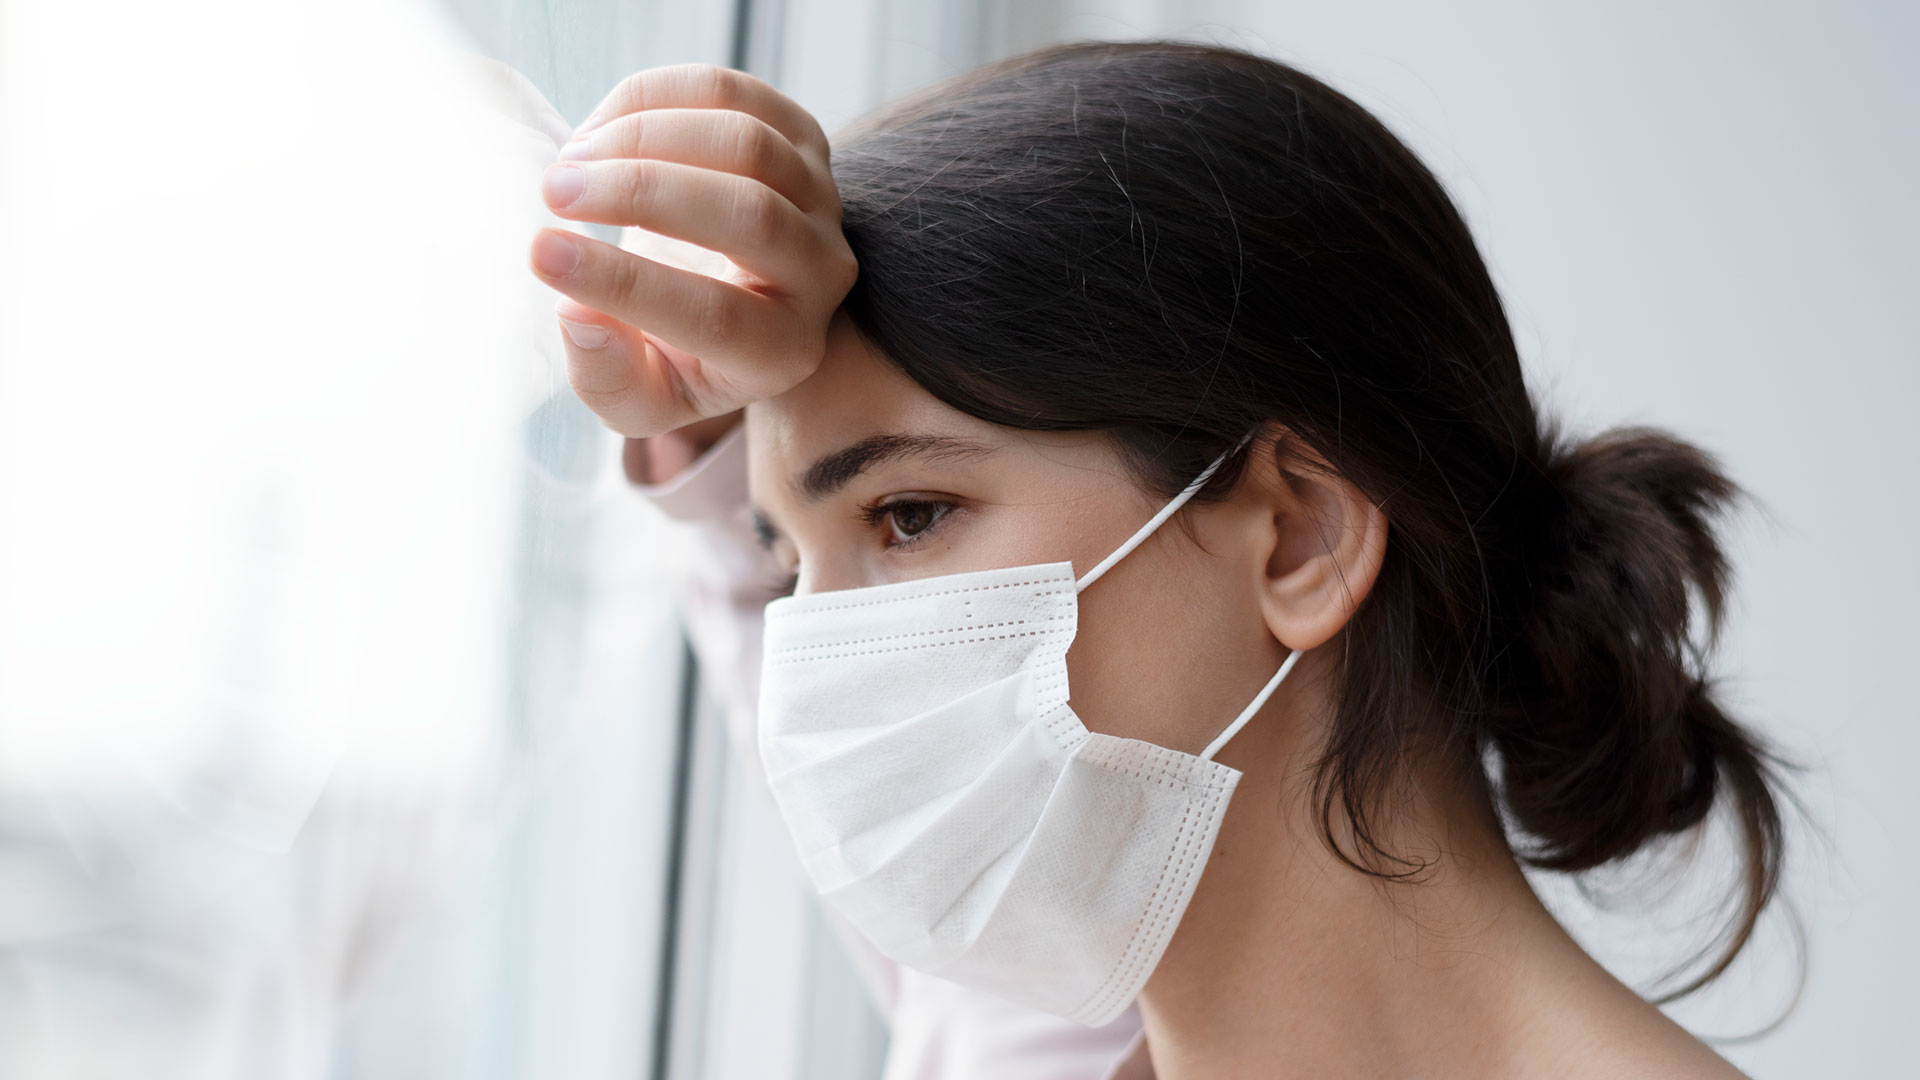 young woman with dark hair wearing a face mask, looks longingly out the window.